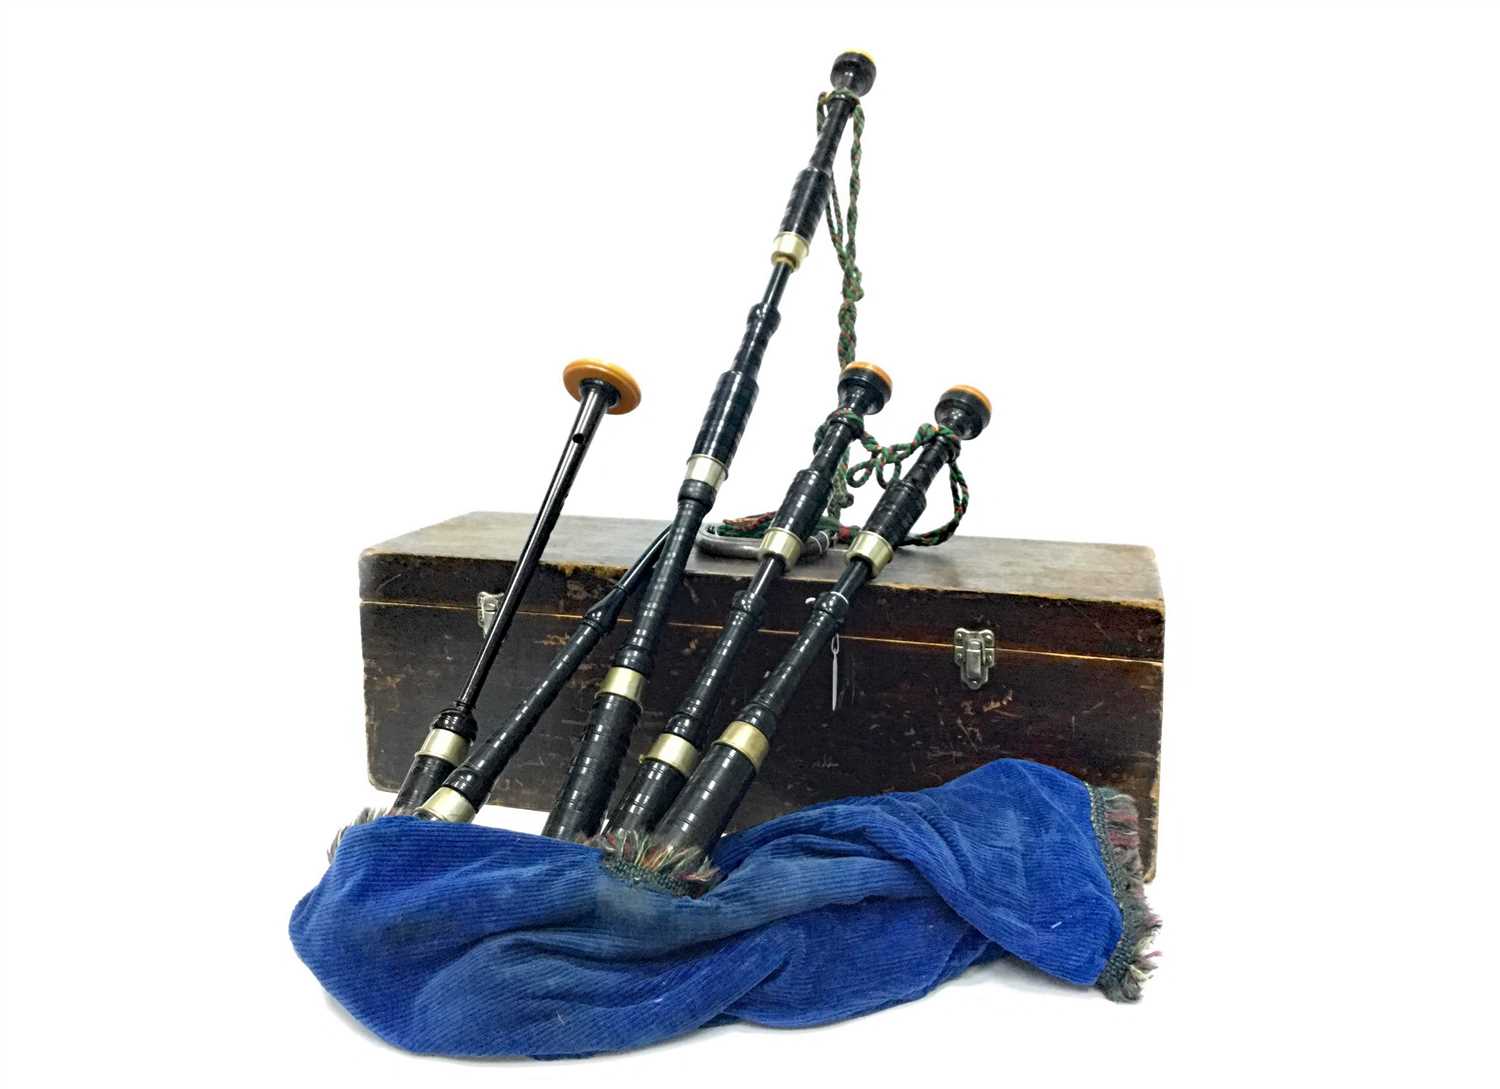 Lot 12 - A SET OF HIGHLAND BAGPIPES BY POSSIBLY R.G. LAWRIE OF GLASGOW